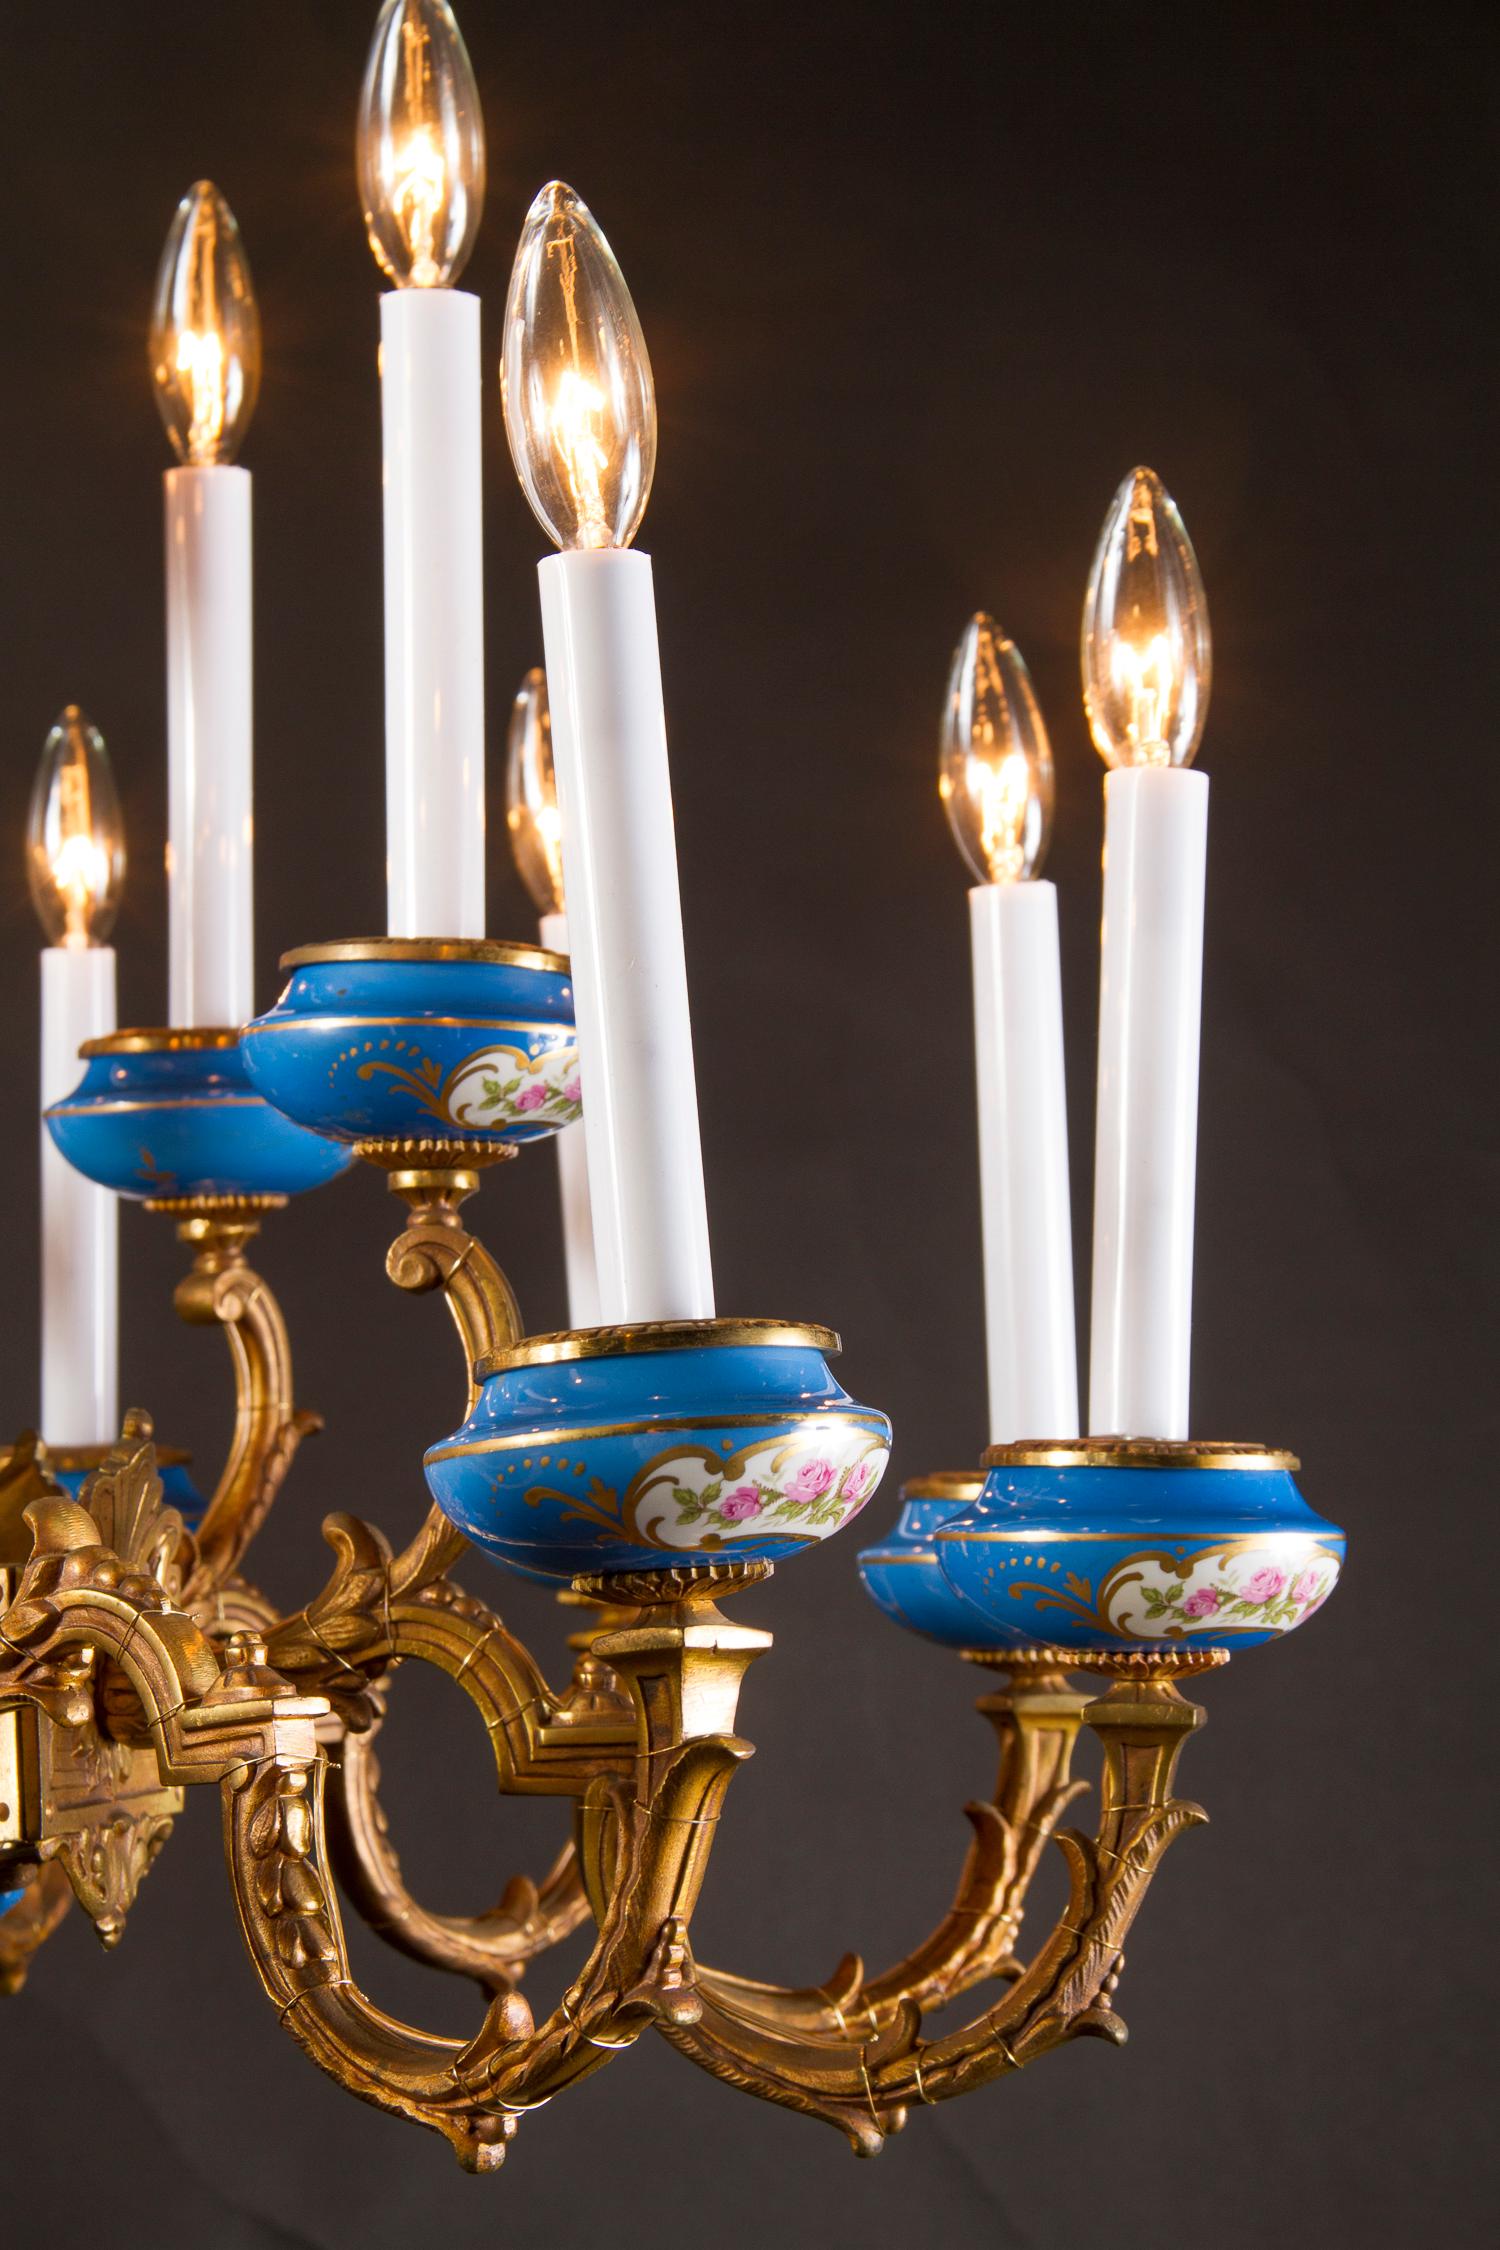 This 19th century French chandelier is an immaculate example of Sevres Porcelain in lighting. Sevres, both a city in France and one of the most highly regarded porcelain manufacturers is known for just that, creating immaculate porcelain. The stamp